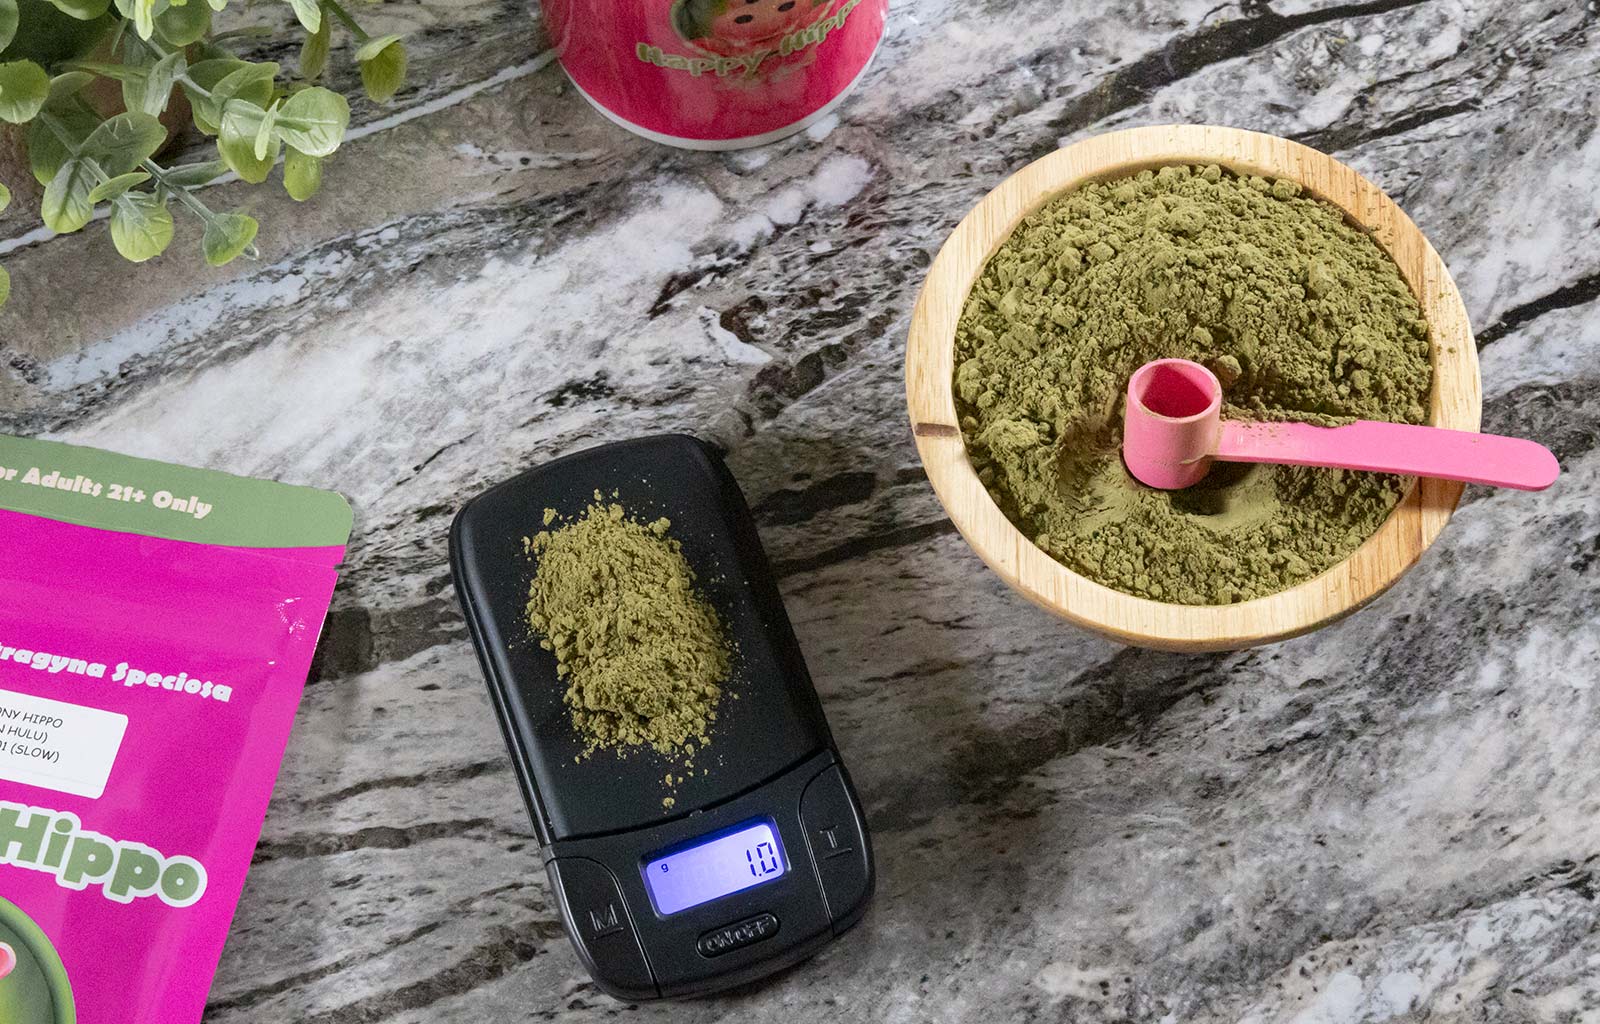 Featured Image depicting a bowl of green maeng da kratom, along side a measuring scoop, digital weight scale, and packet of happy hippo kratom powder